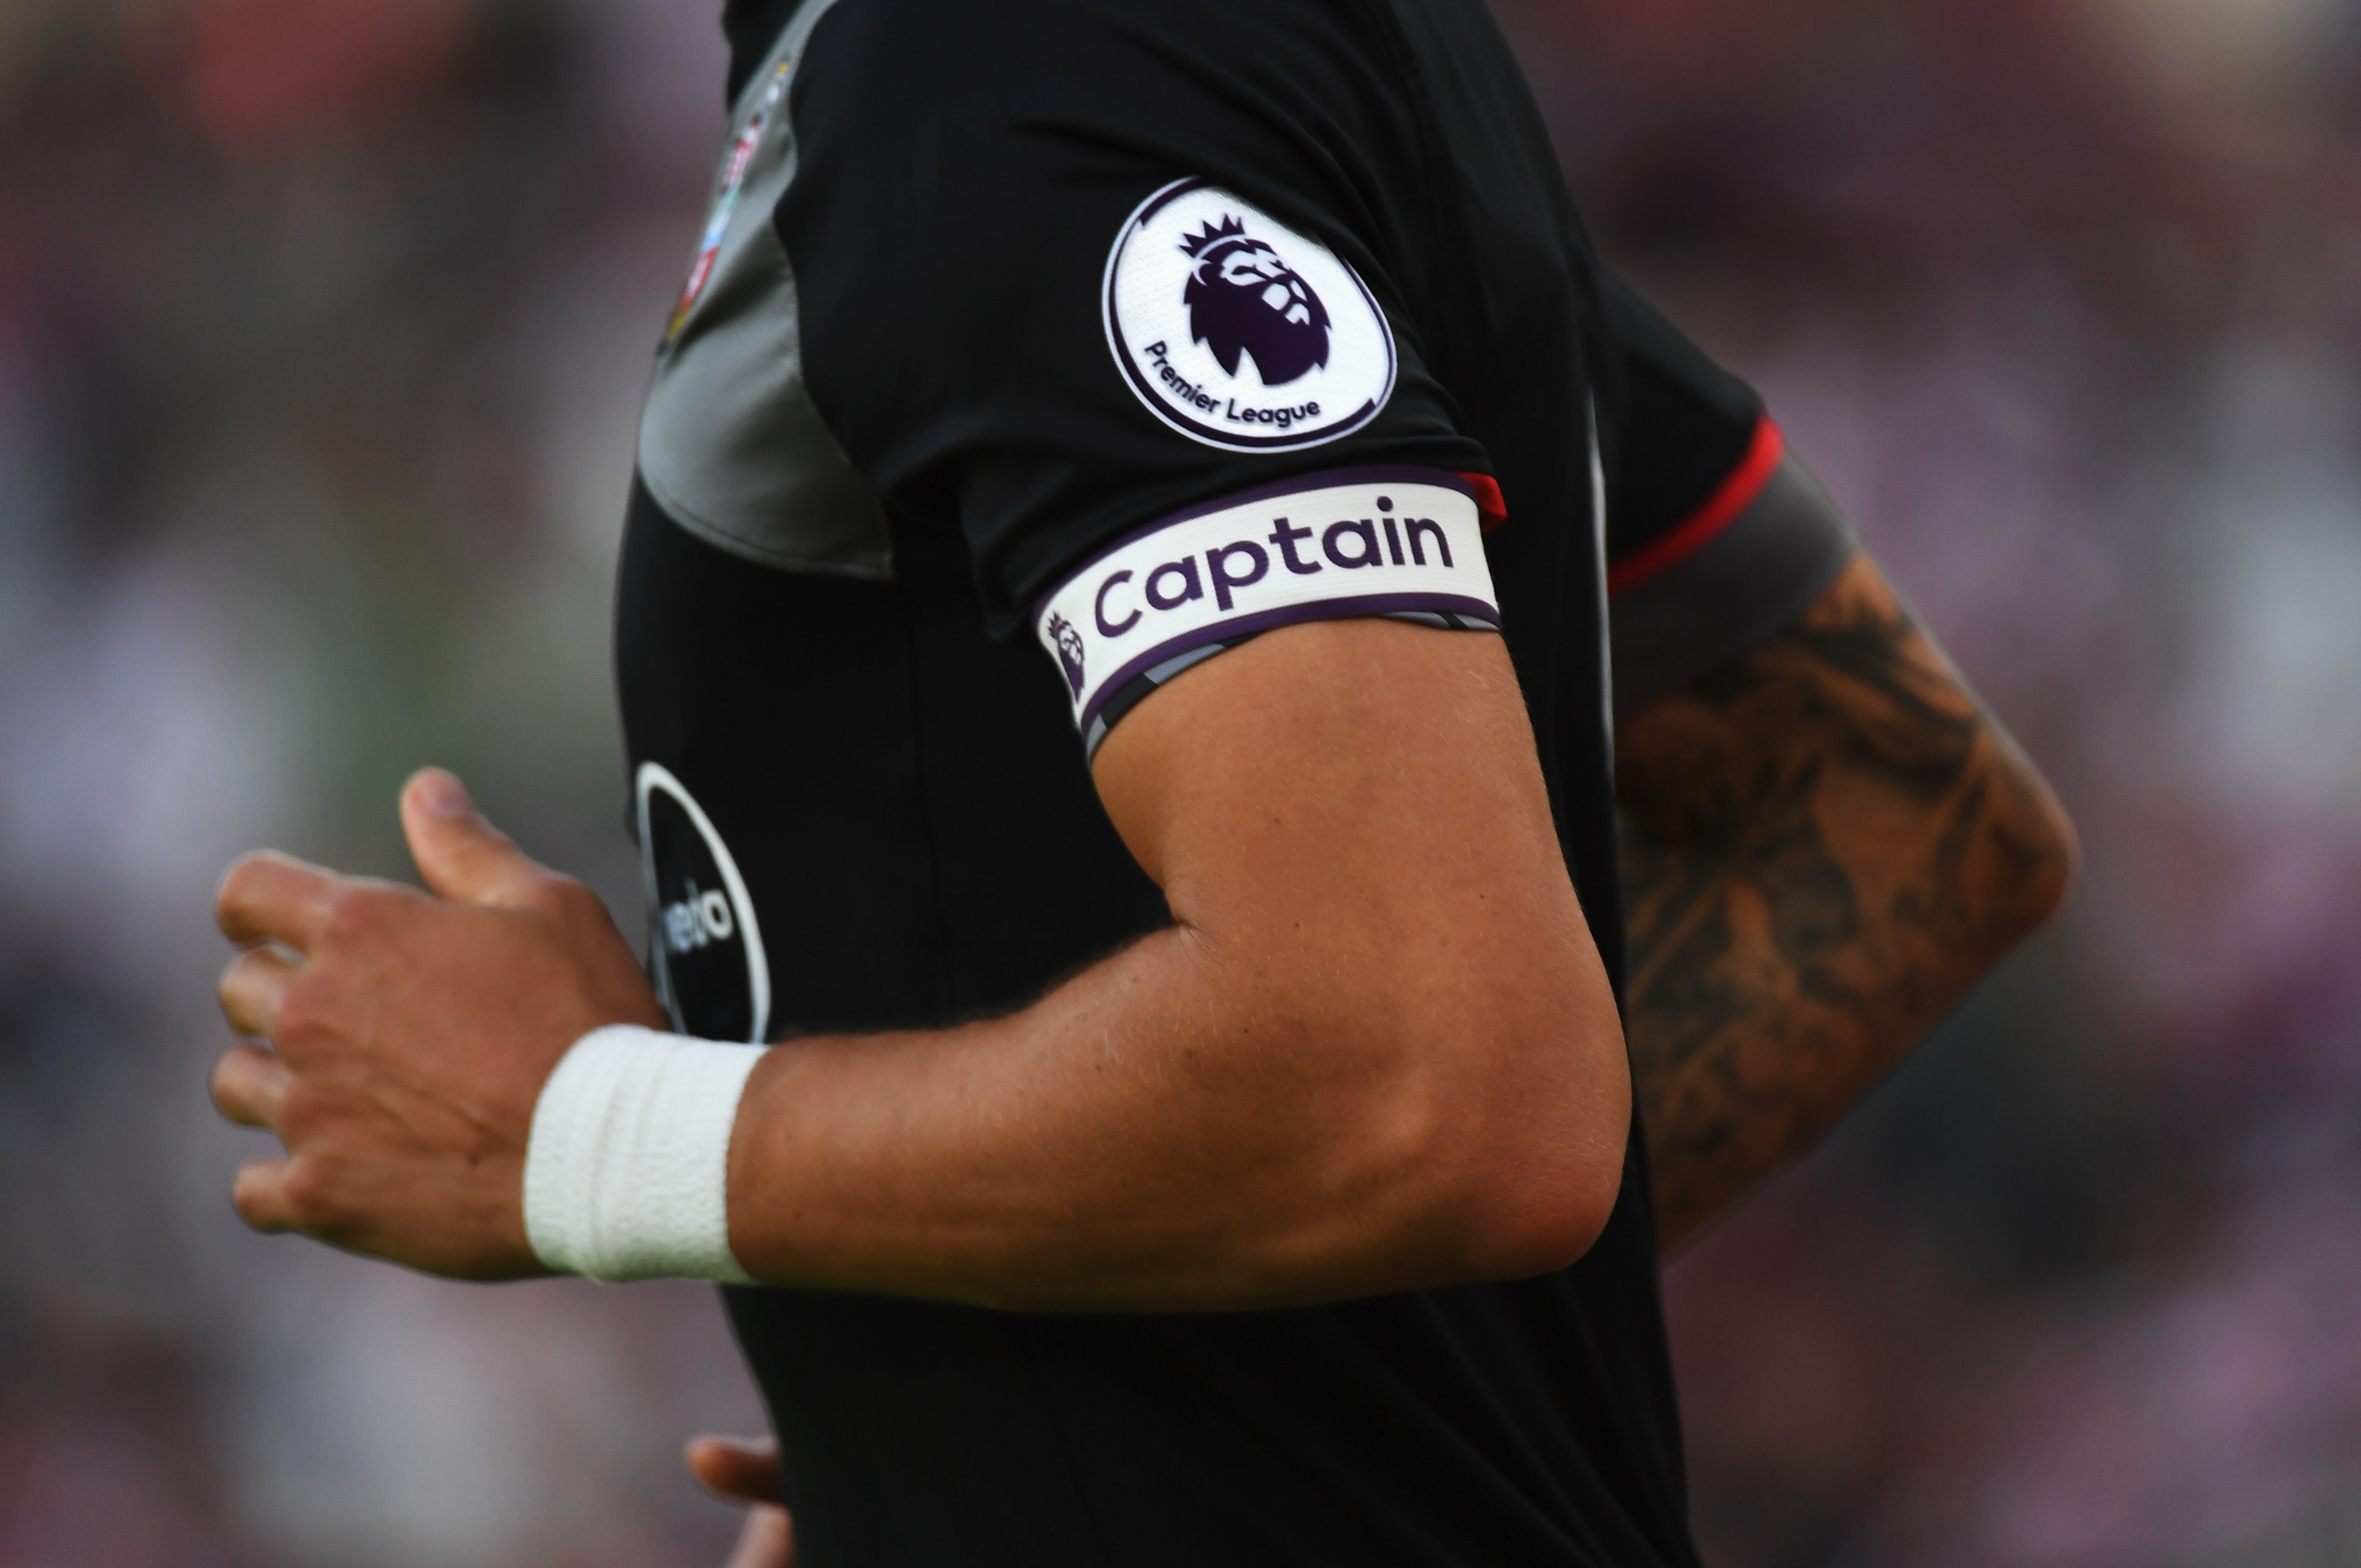 LONDON, ENGLAND - SEPTEMBER 25:  A detailed view of the captain's armband of Jose Fonte of Southampton during the Premier League match between West Ham United and Southampton at London Stadium on September 25, 2016 in London, England.  (Photo by Mike Hewitt/Getty Images)